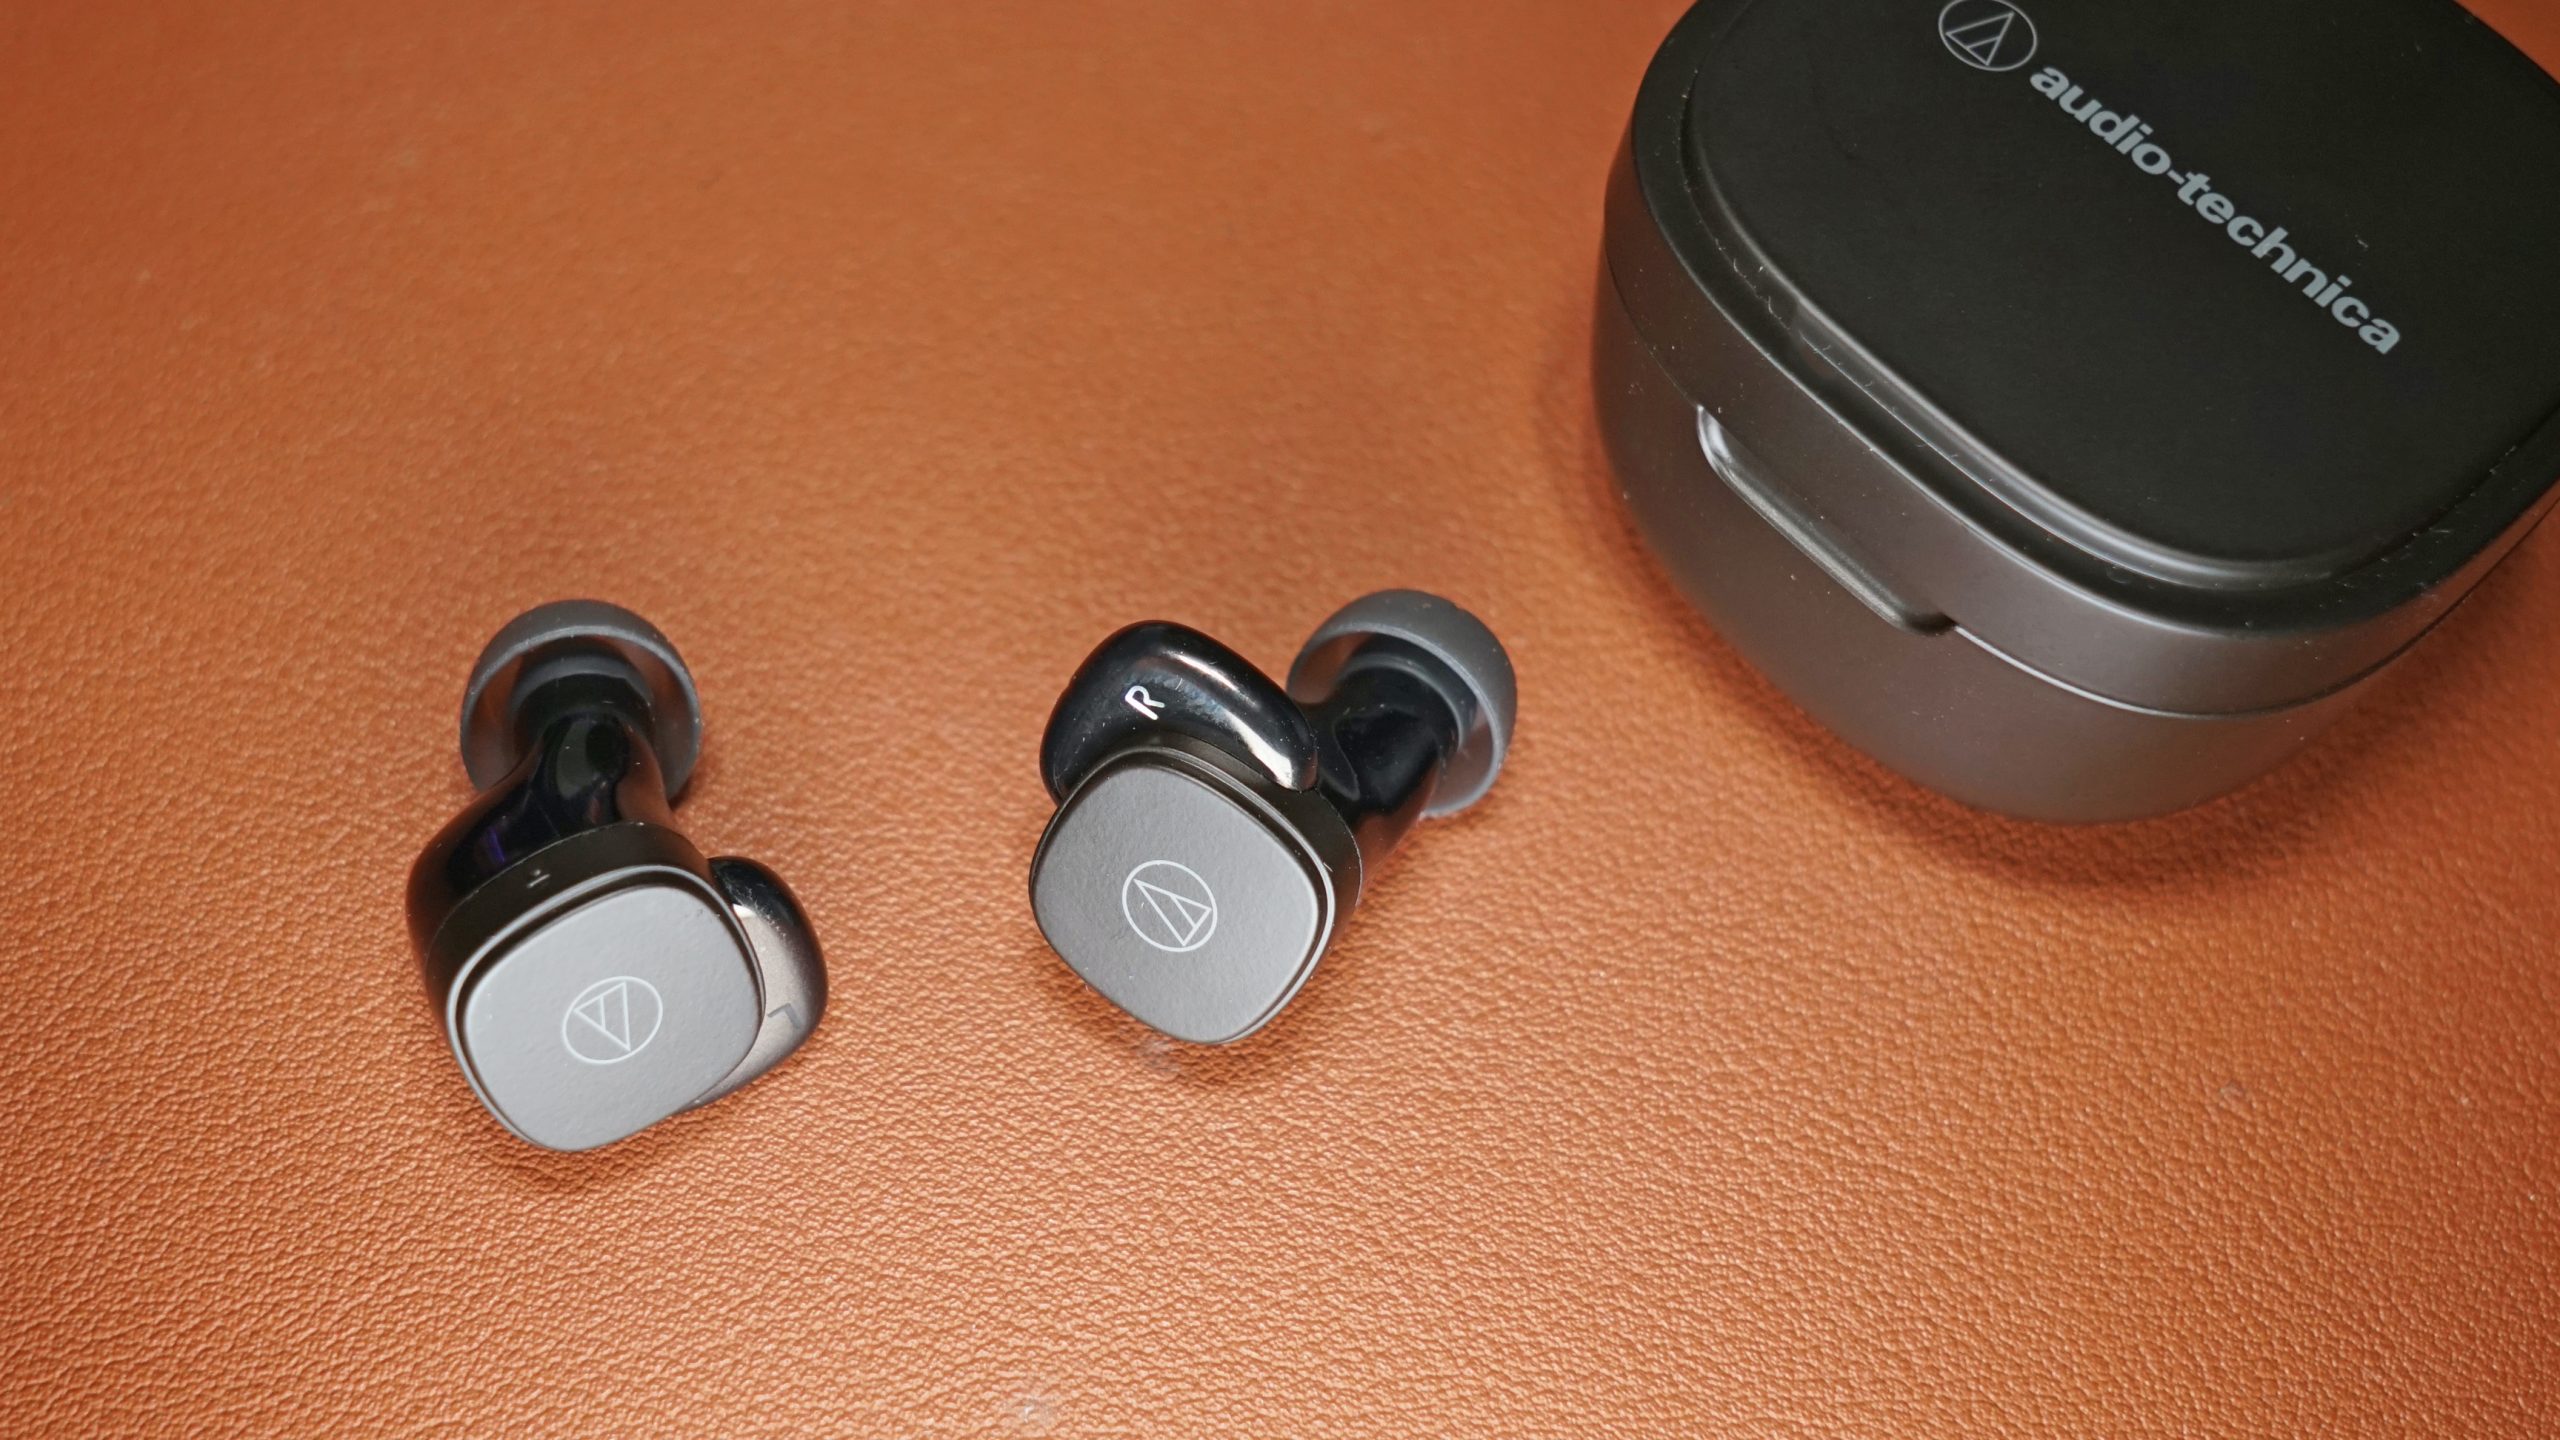 Audio-Technica ATH-M50X review: A durable standard - SoundGuys